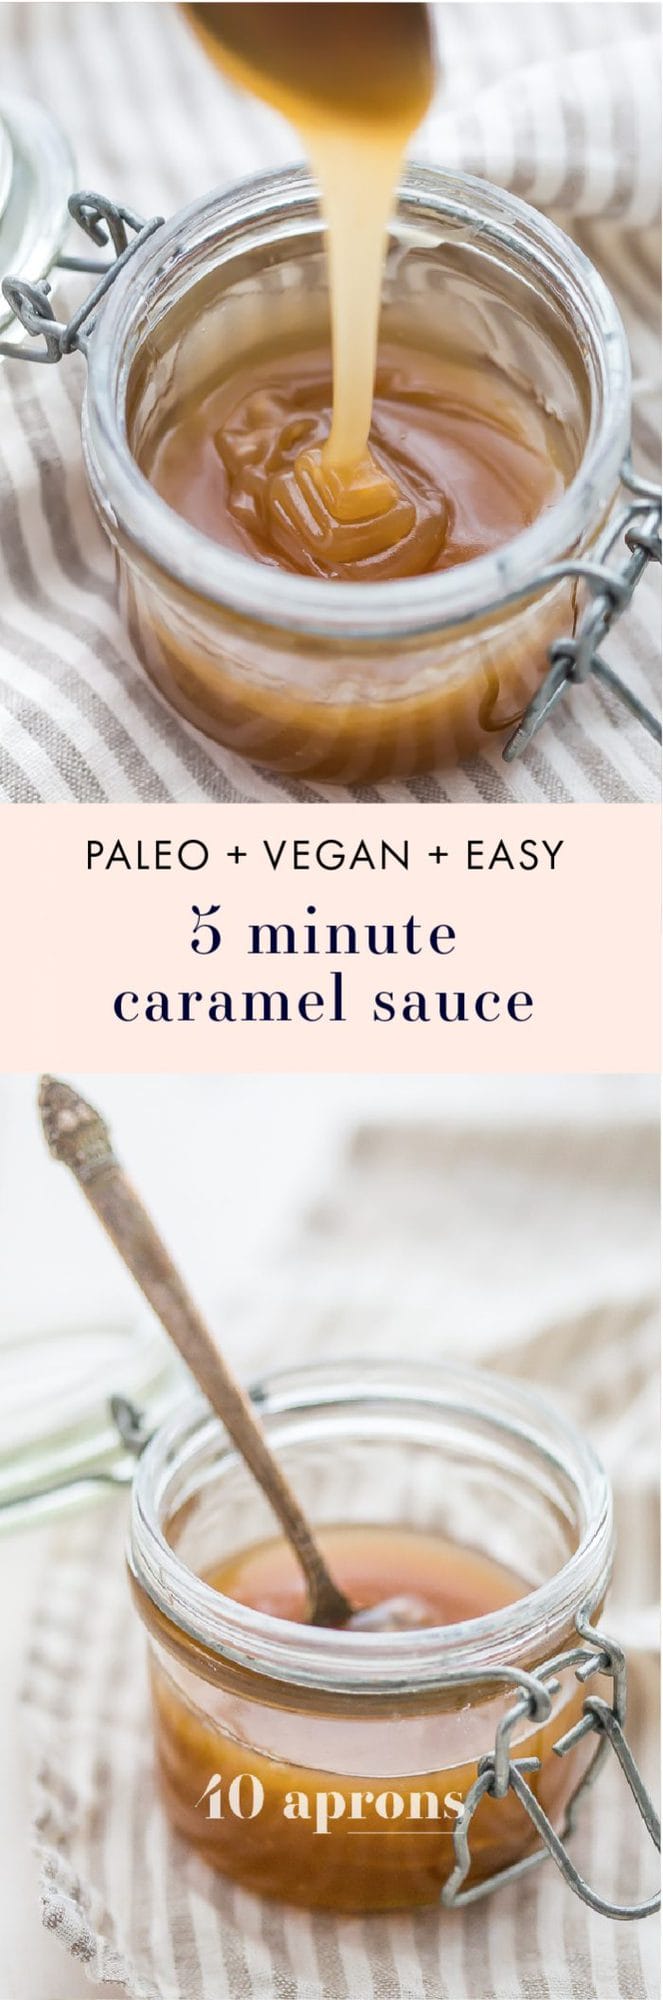 This 5-minute paleo caramel sauce is so quick and easy but rich and delicious. My favorite paleo caramel sauce or vegan caramel sauce out there!